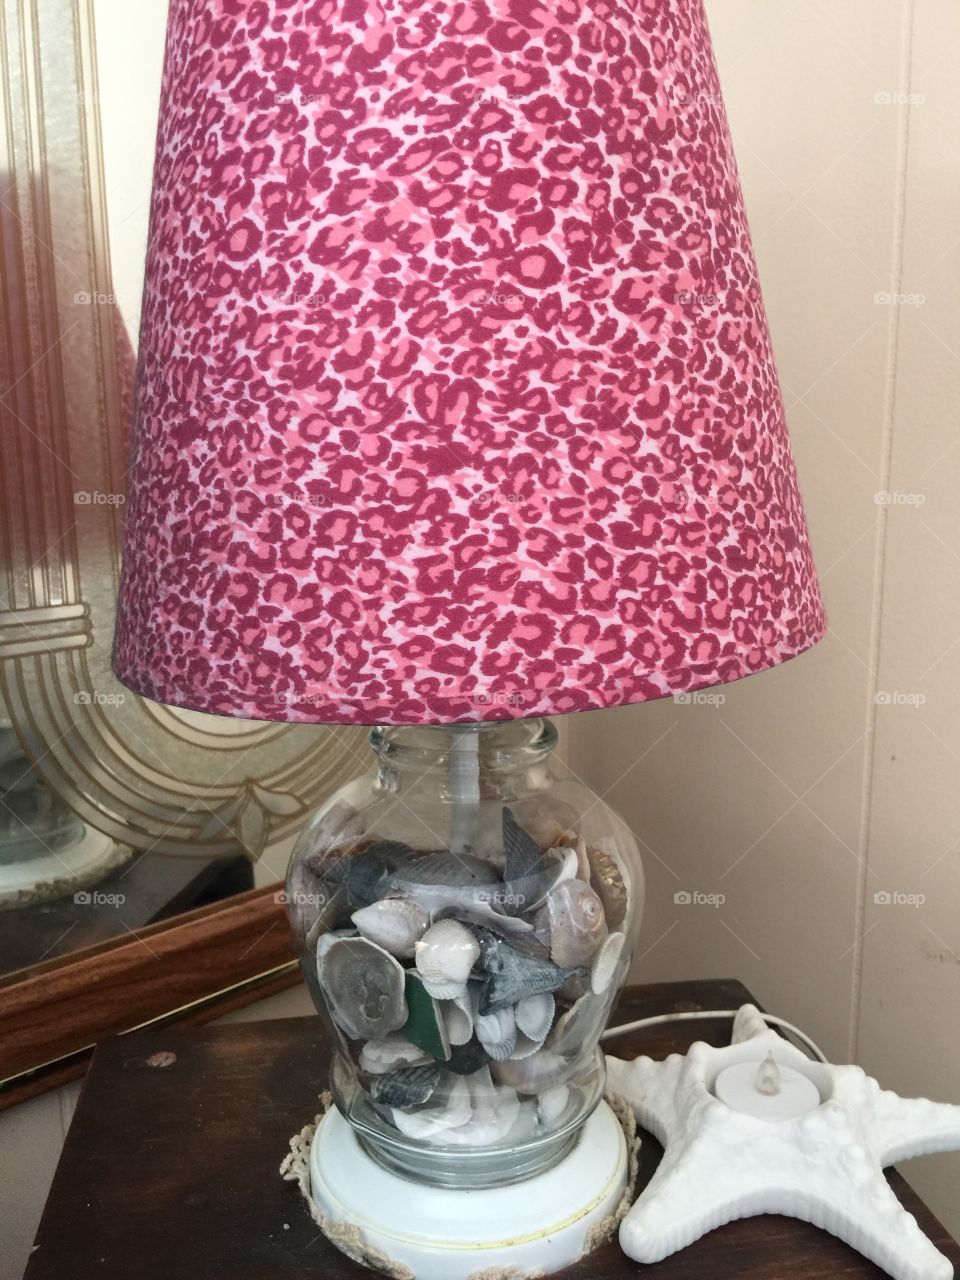 Collection of shells in a Pretty in pink shade and glass lamp